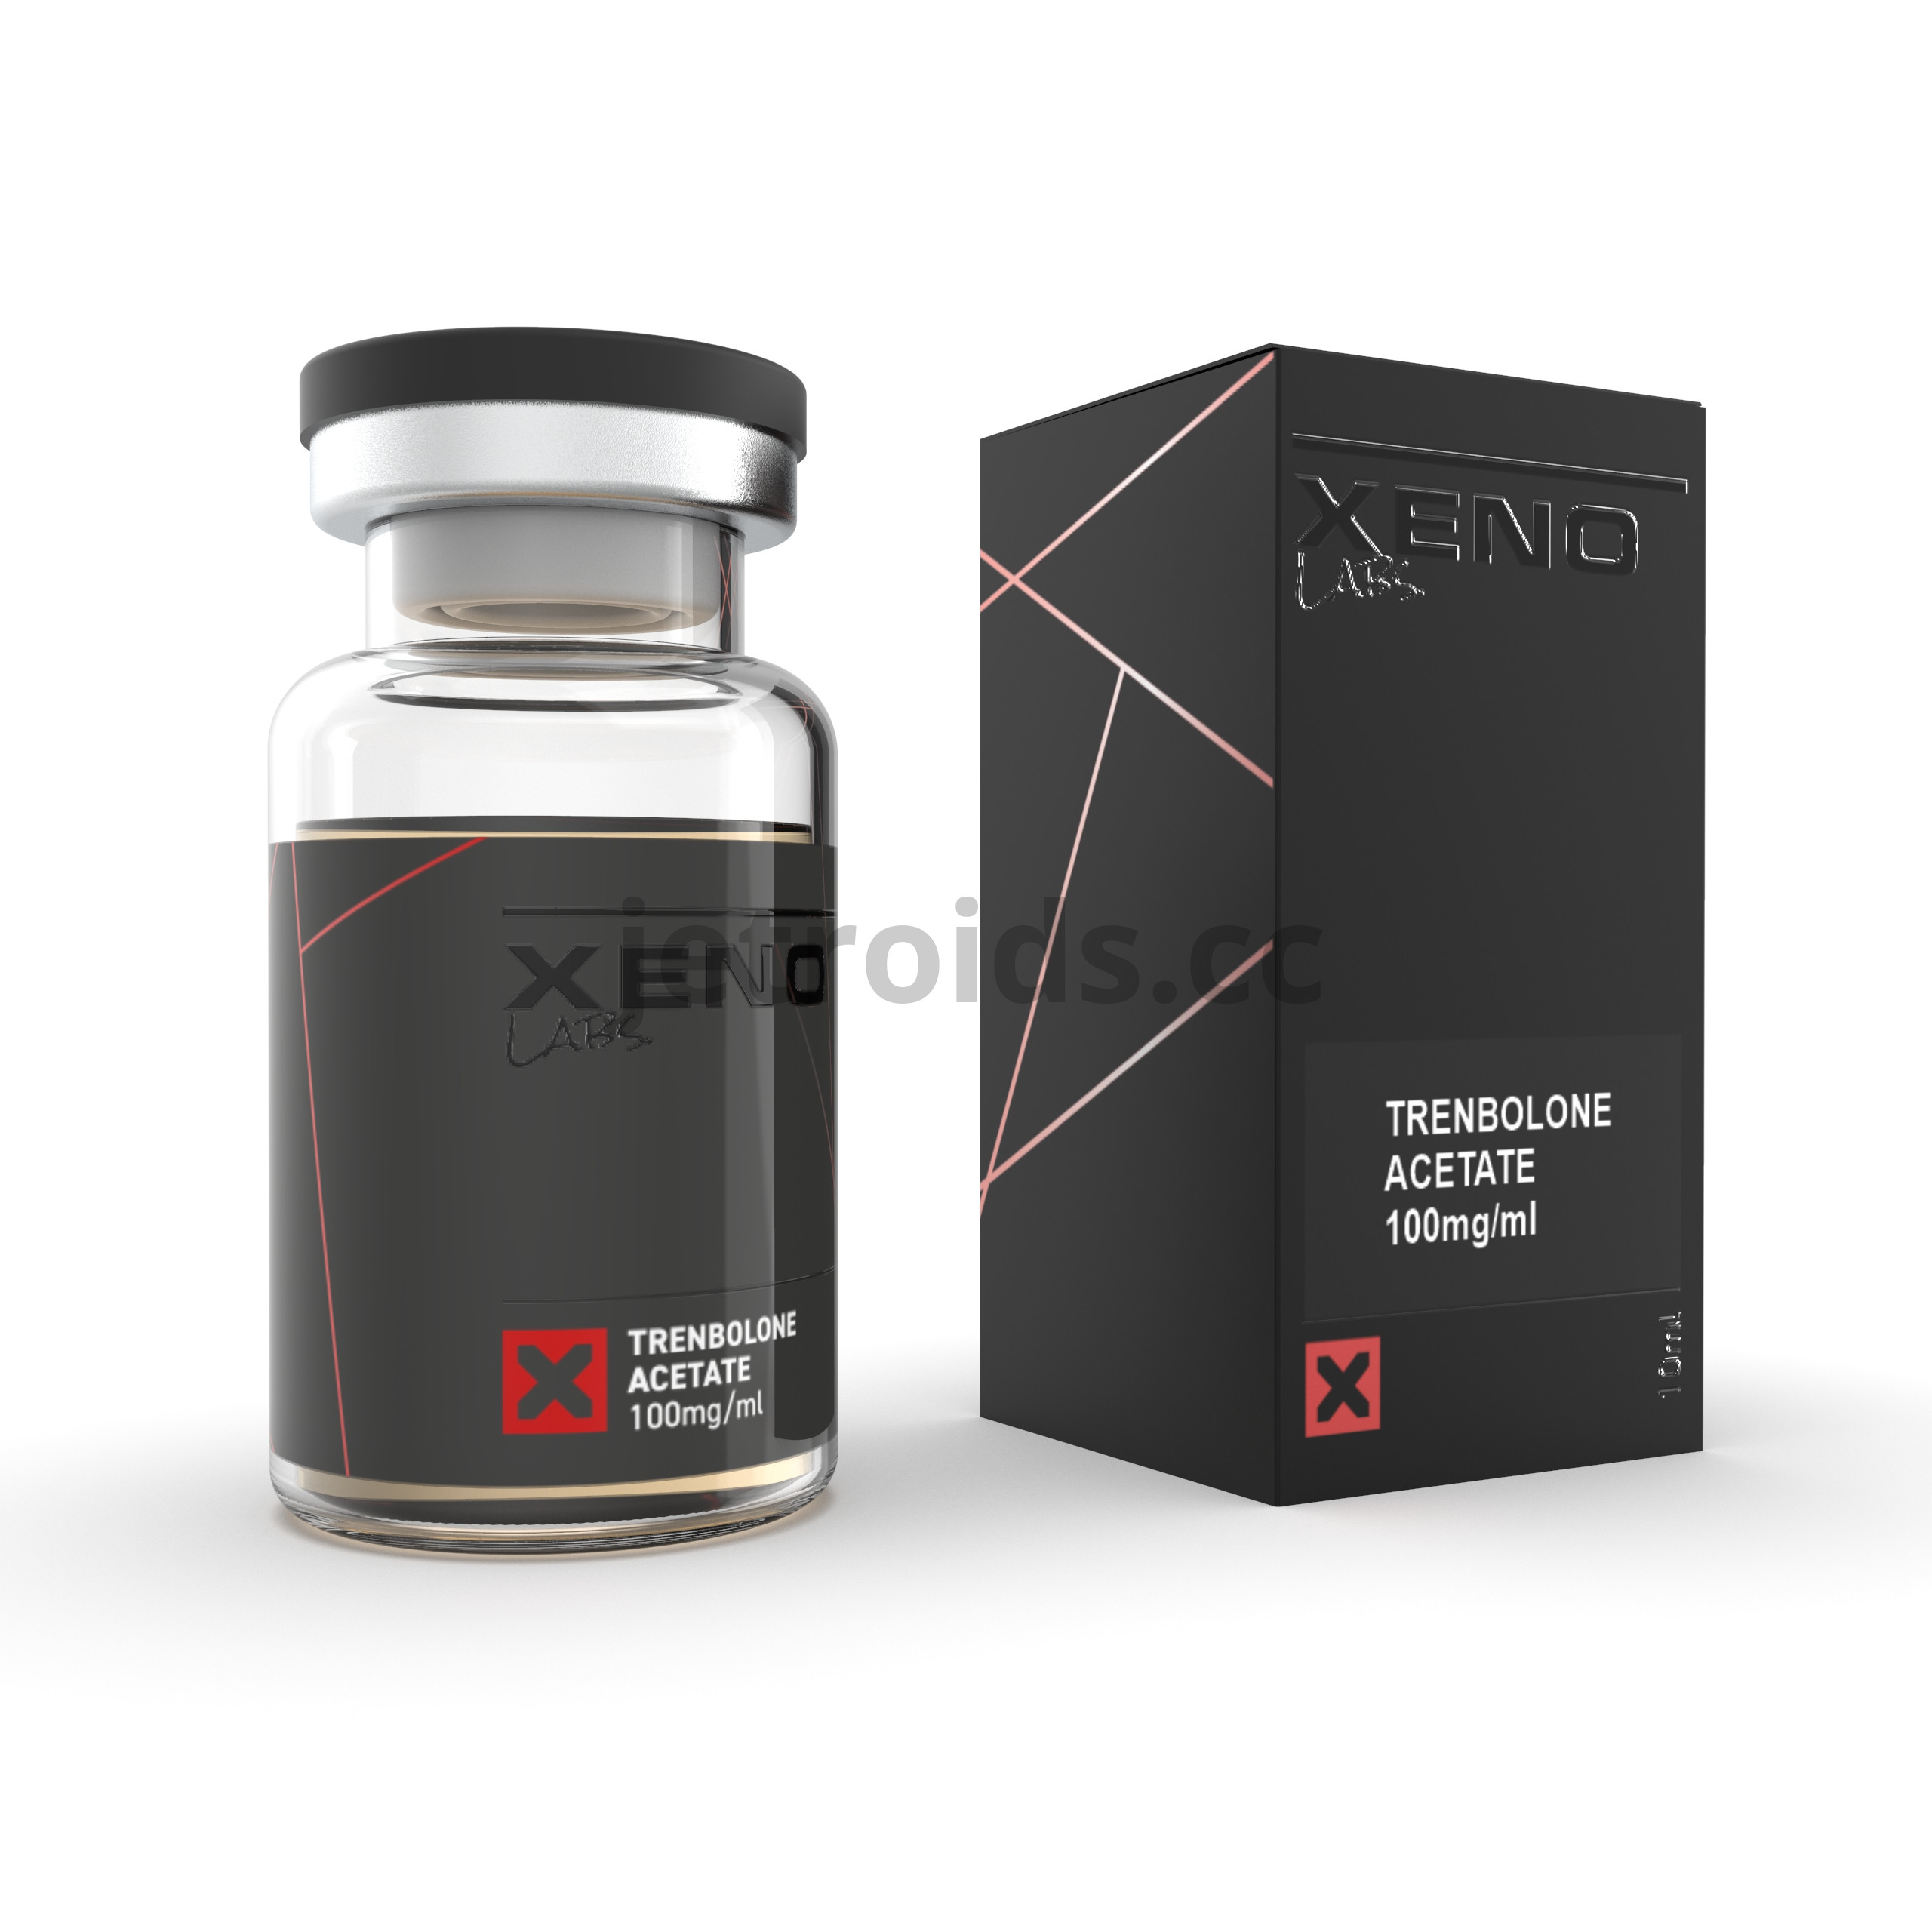 Xeno Labs - US Trenbolone Acetate 100 Product Info